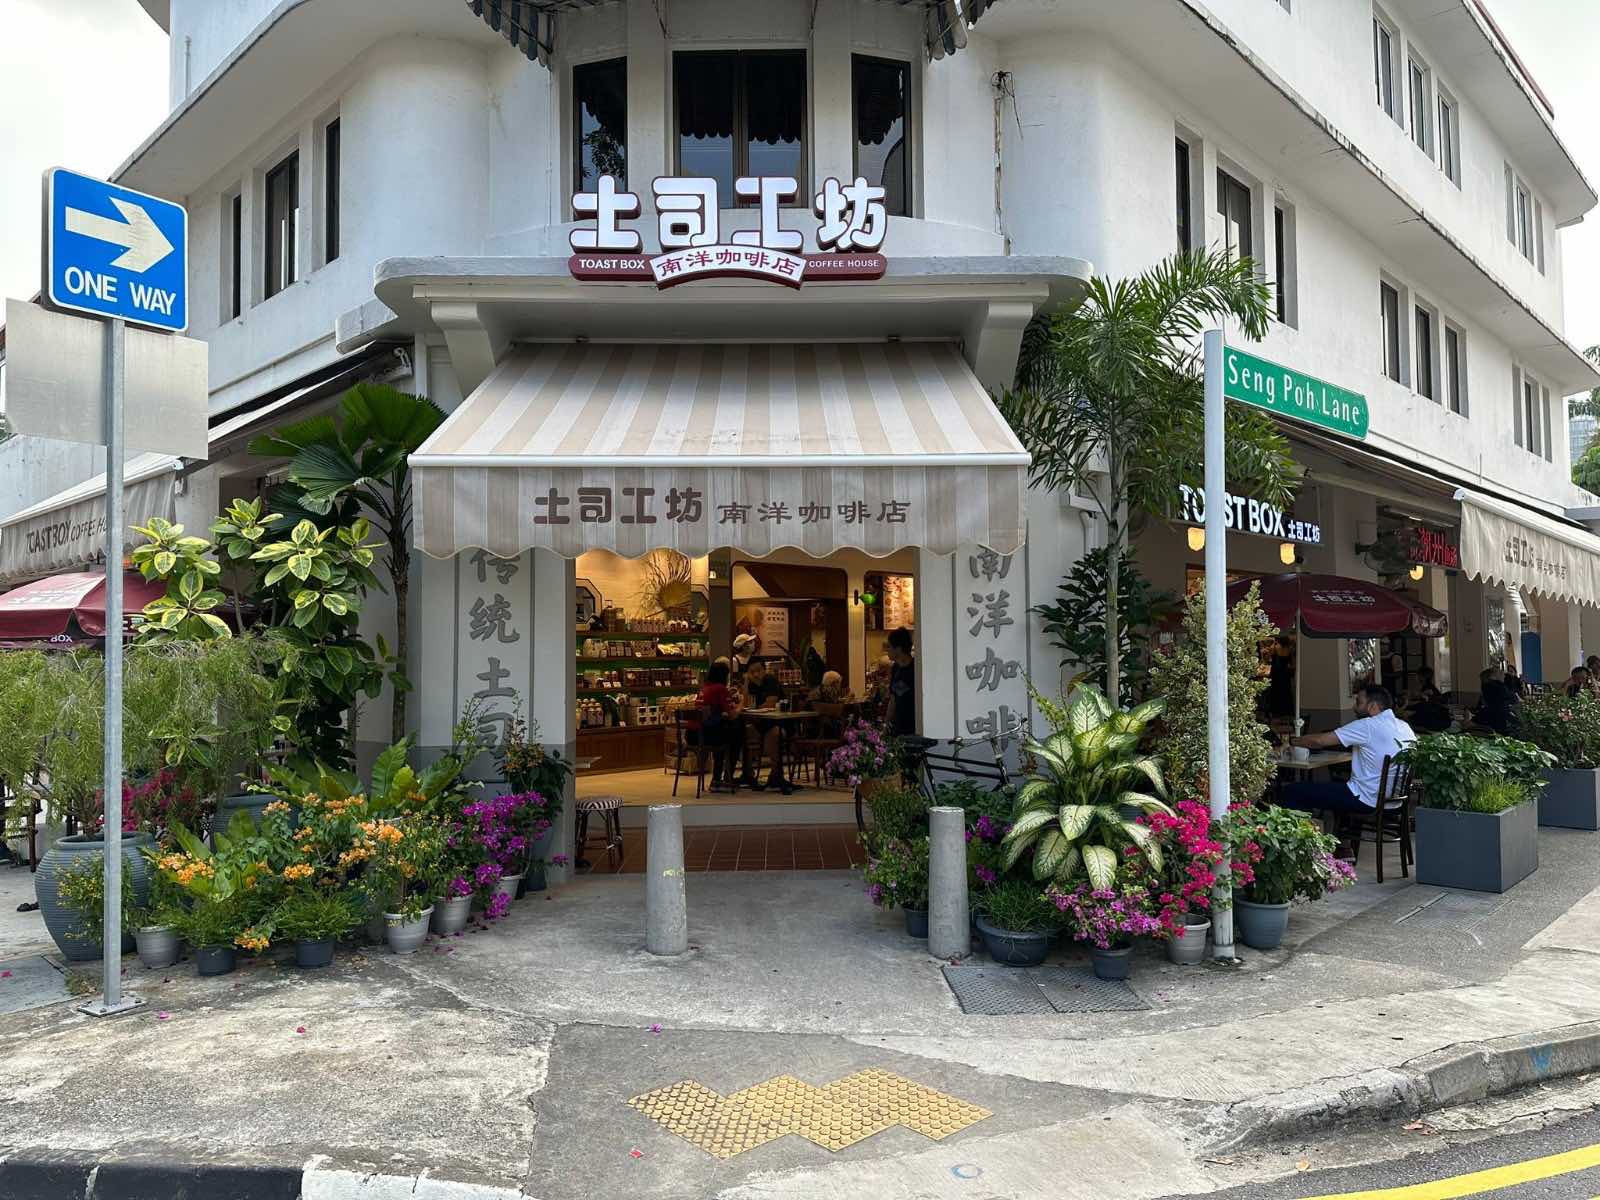 , Lemon cream toast, claypot Hokkien mee, Teochew fish soup and more at Toast Box Coffee House in Tiong Bahru